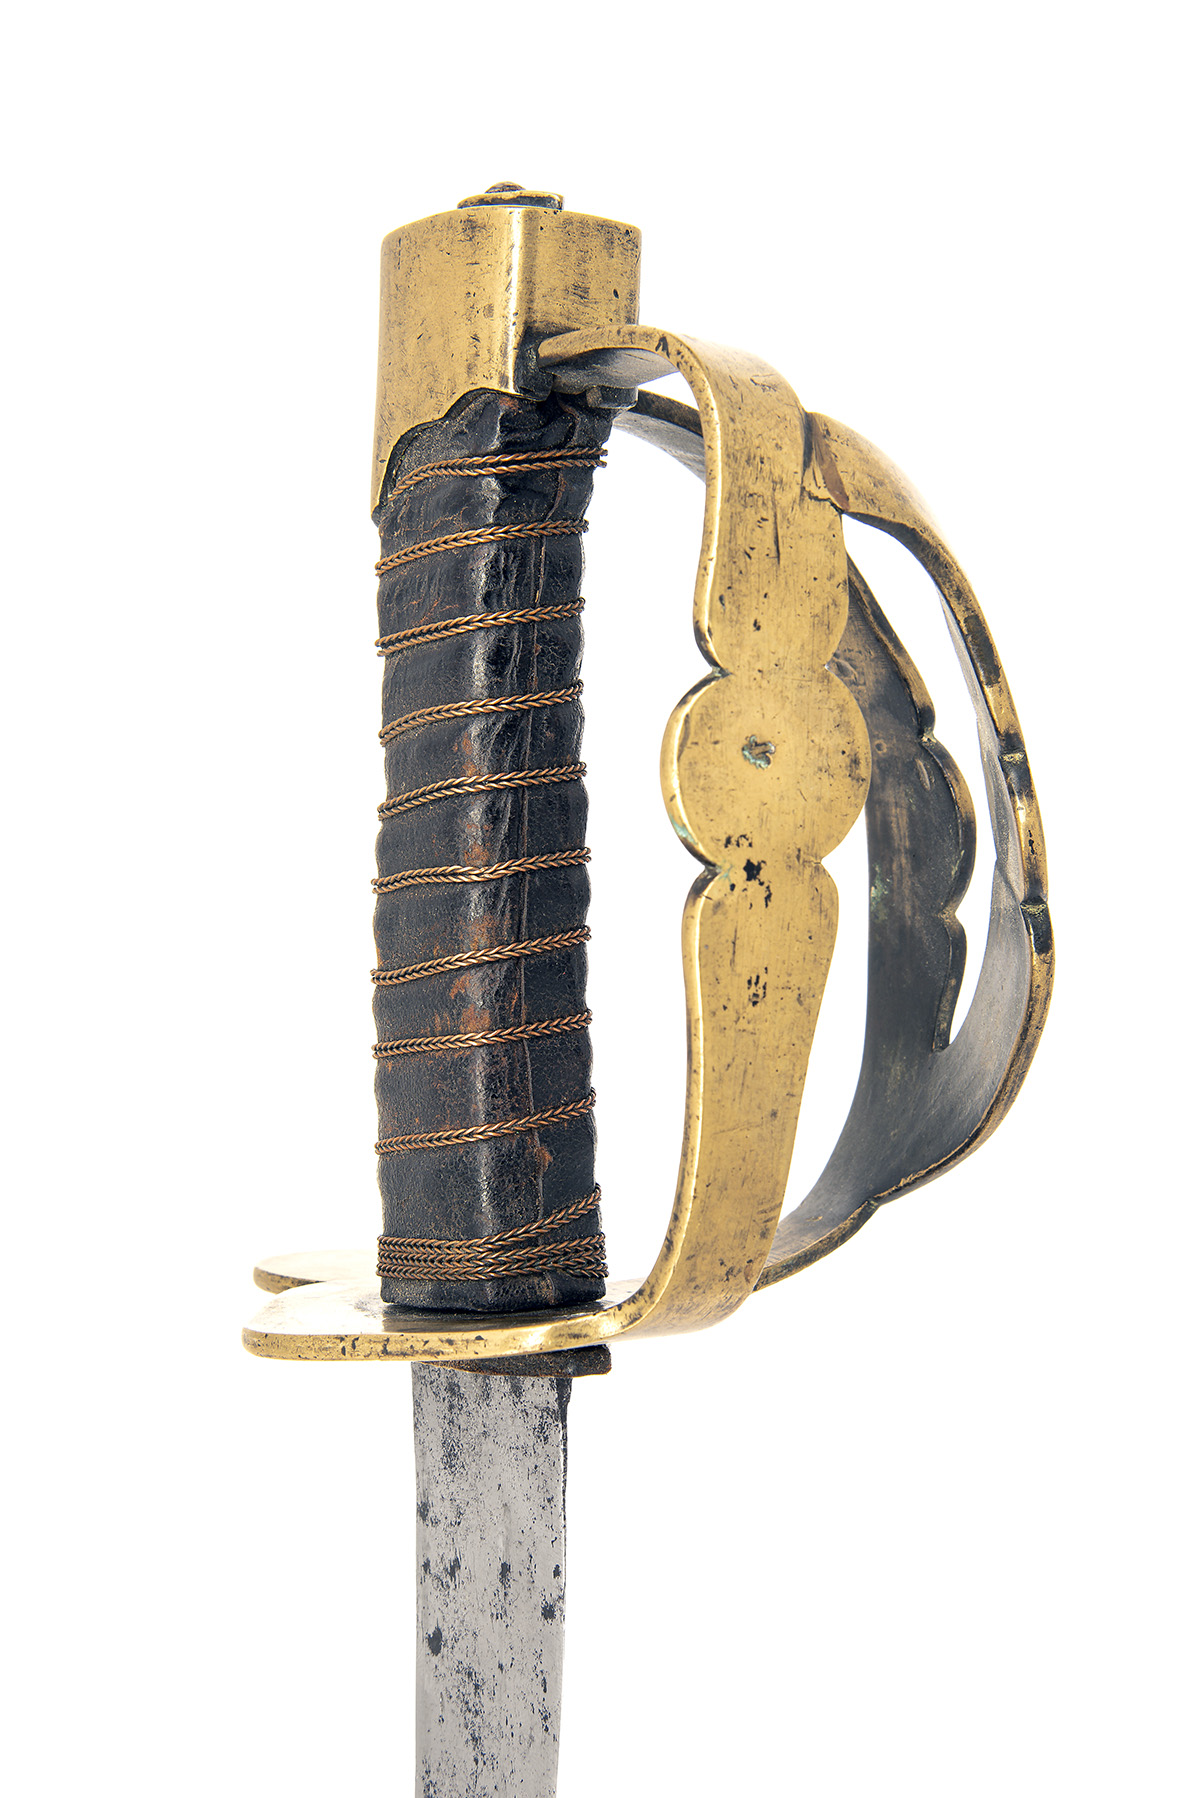 A RARE FRENCH 1790 PATTERN 'CHASSEUR A CHEVAL' TROOPER'S SWORD, circa 1800 and made specifically for - Image 3 of 3